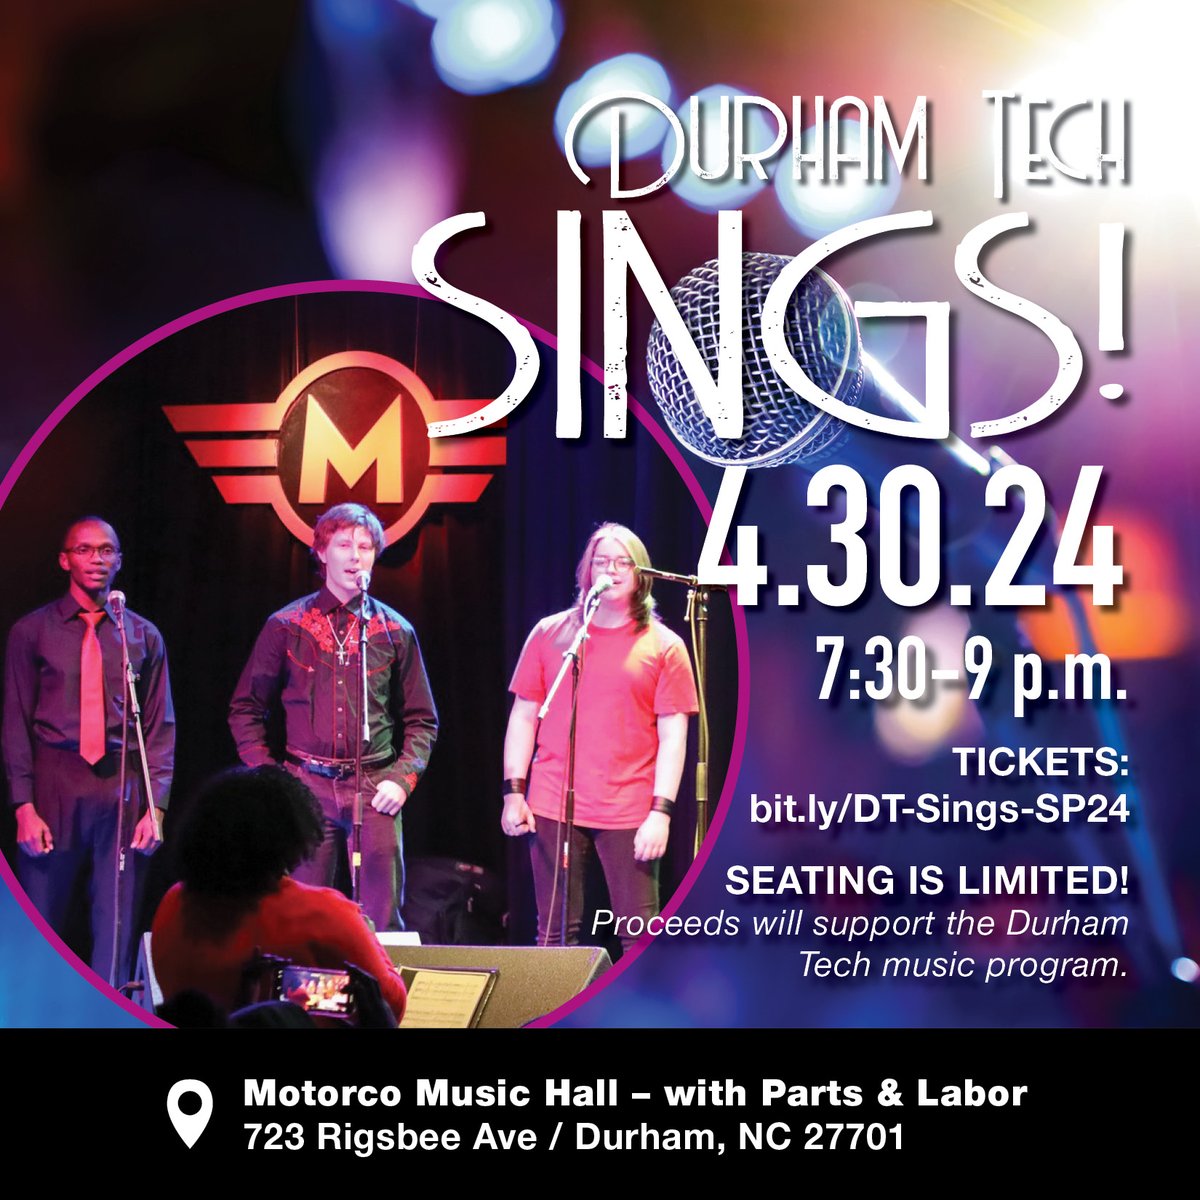 Durham Tech SINGS! 🎶 The Durham Tech Ensemble Class, under the direction of Adia Ledbetter, will perform musical selections at the Motorco Music Hall, with the accompaniment of professional musicians. Seating is limited, so get your tickets now! 👉 bit.ly/DT-Sings-SP24